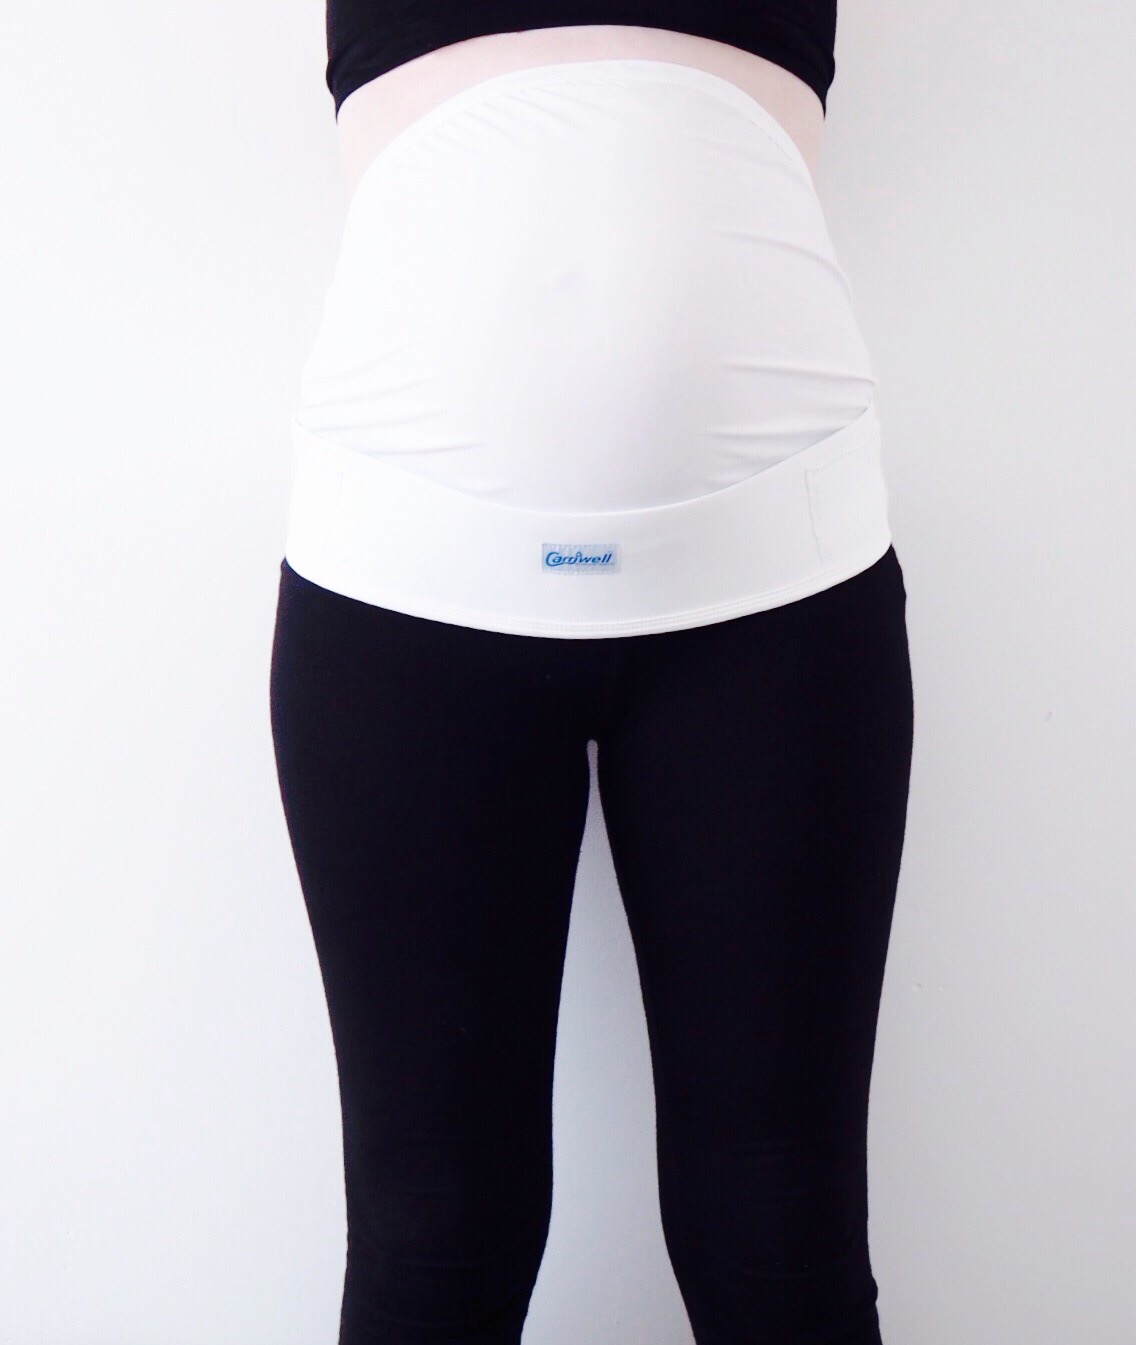 Pregnancy back pain Carriwell overbelly support belt